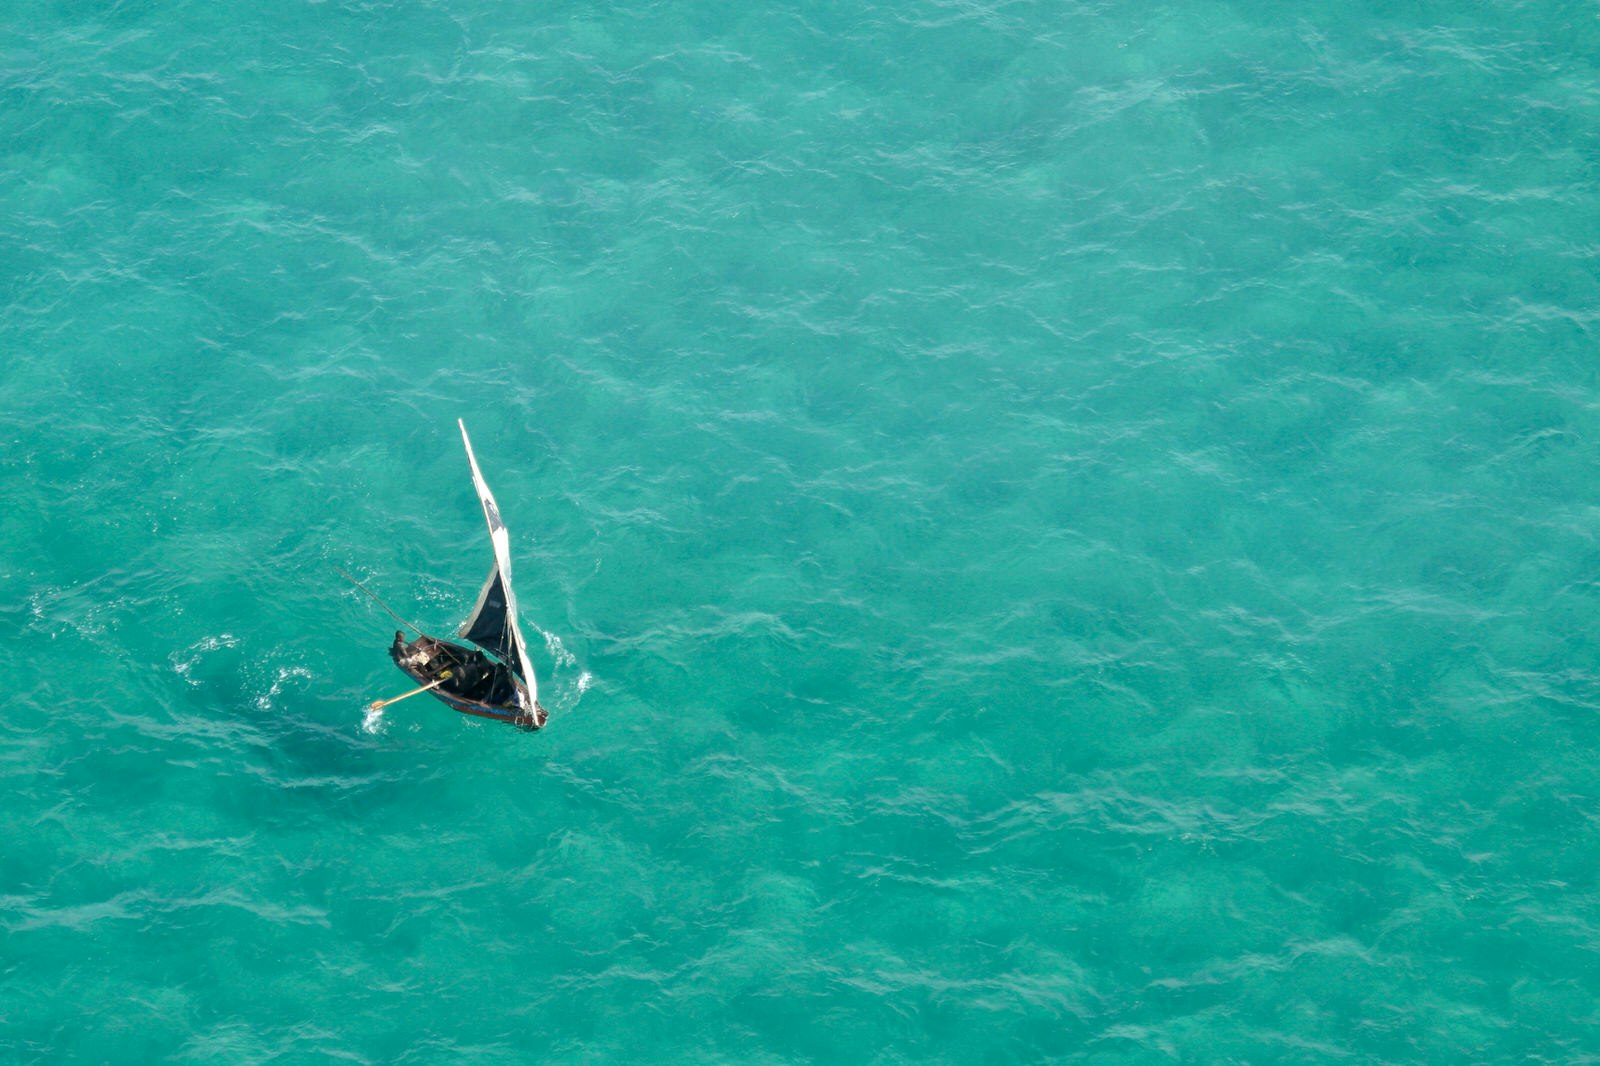 Aerial view of a small sailboat (called a dhow) on the open sea, Mozambique, southern Africa © EcoPic / Getty Images